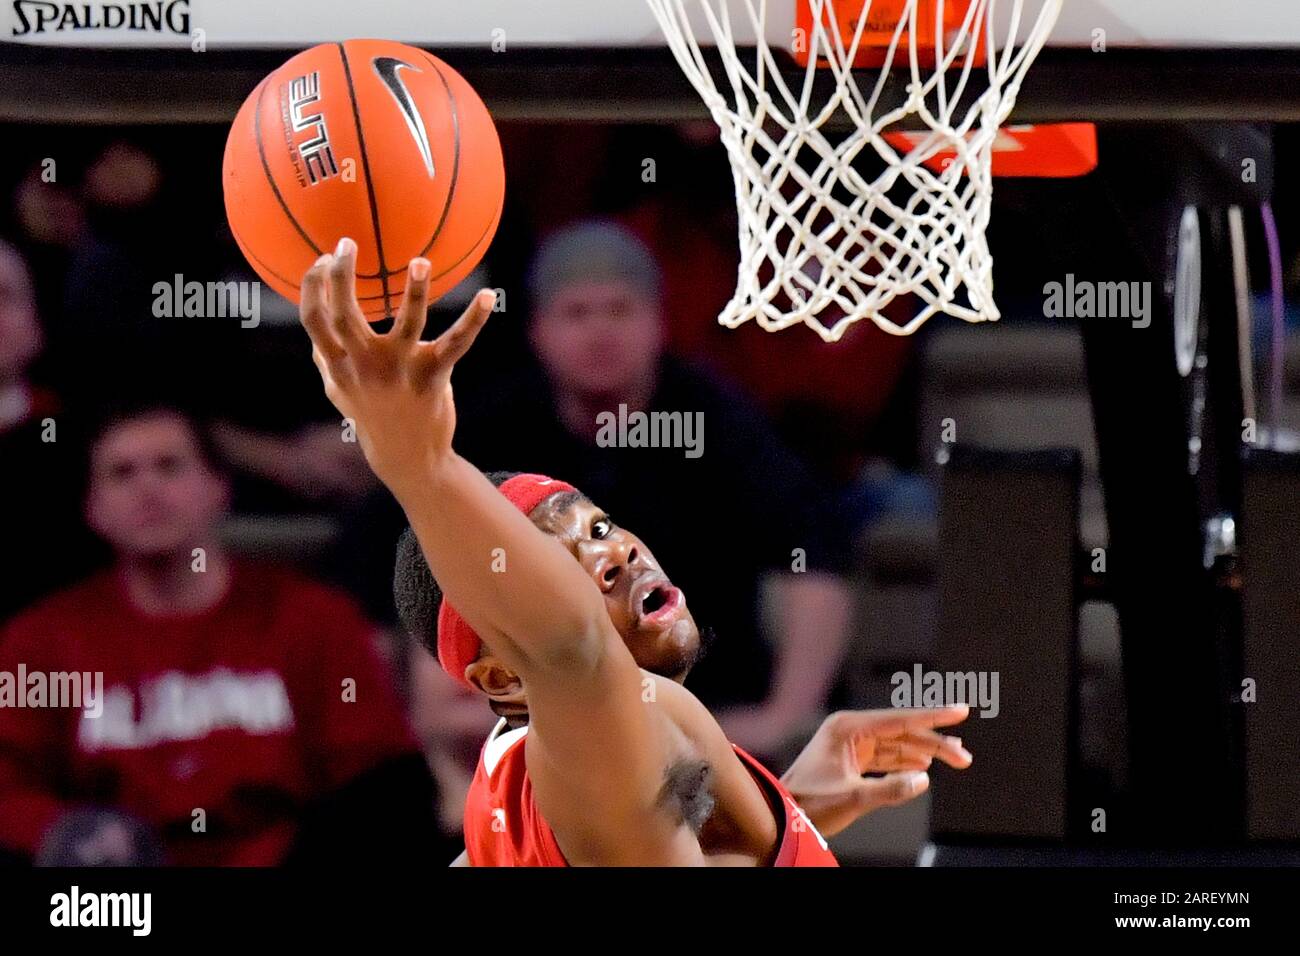 Alabama Crimson Tide forward Javian Davis (0) gets the rebound against the Vanderbilt Commodores during the first half of an NCAA SEC basketball game at Memorial Gym. Wednesday, Jan 22, 2020, in Nashville. Alabama defeated Vanderbilt 77-62. (Photo by IOS/ESPA-Images) Stock Photo